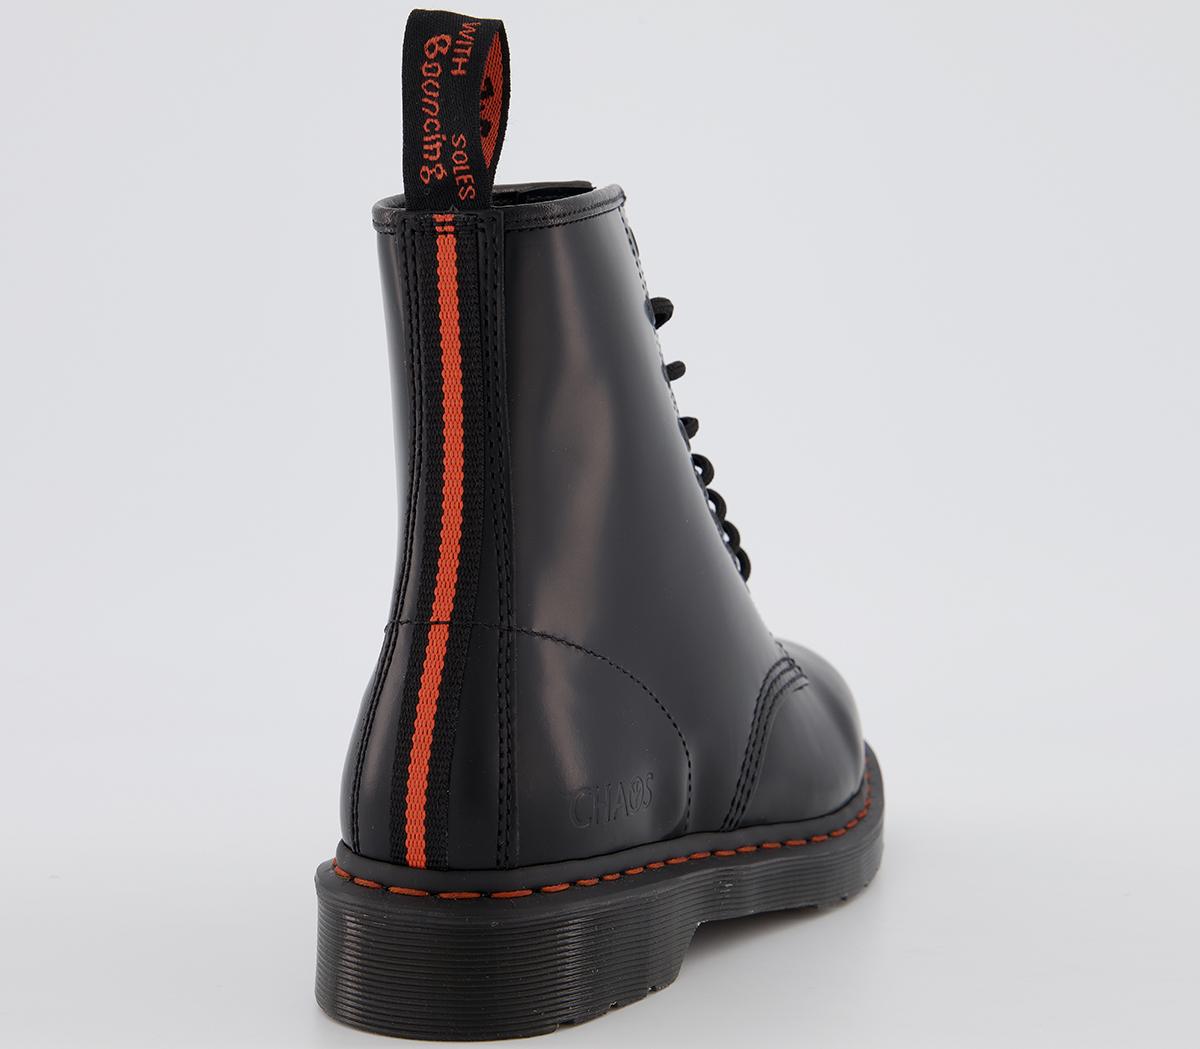 Dr. Martens 1460 Beams X Babylon Boots Black Smooth Leather - Boots